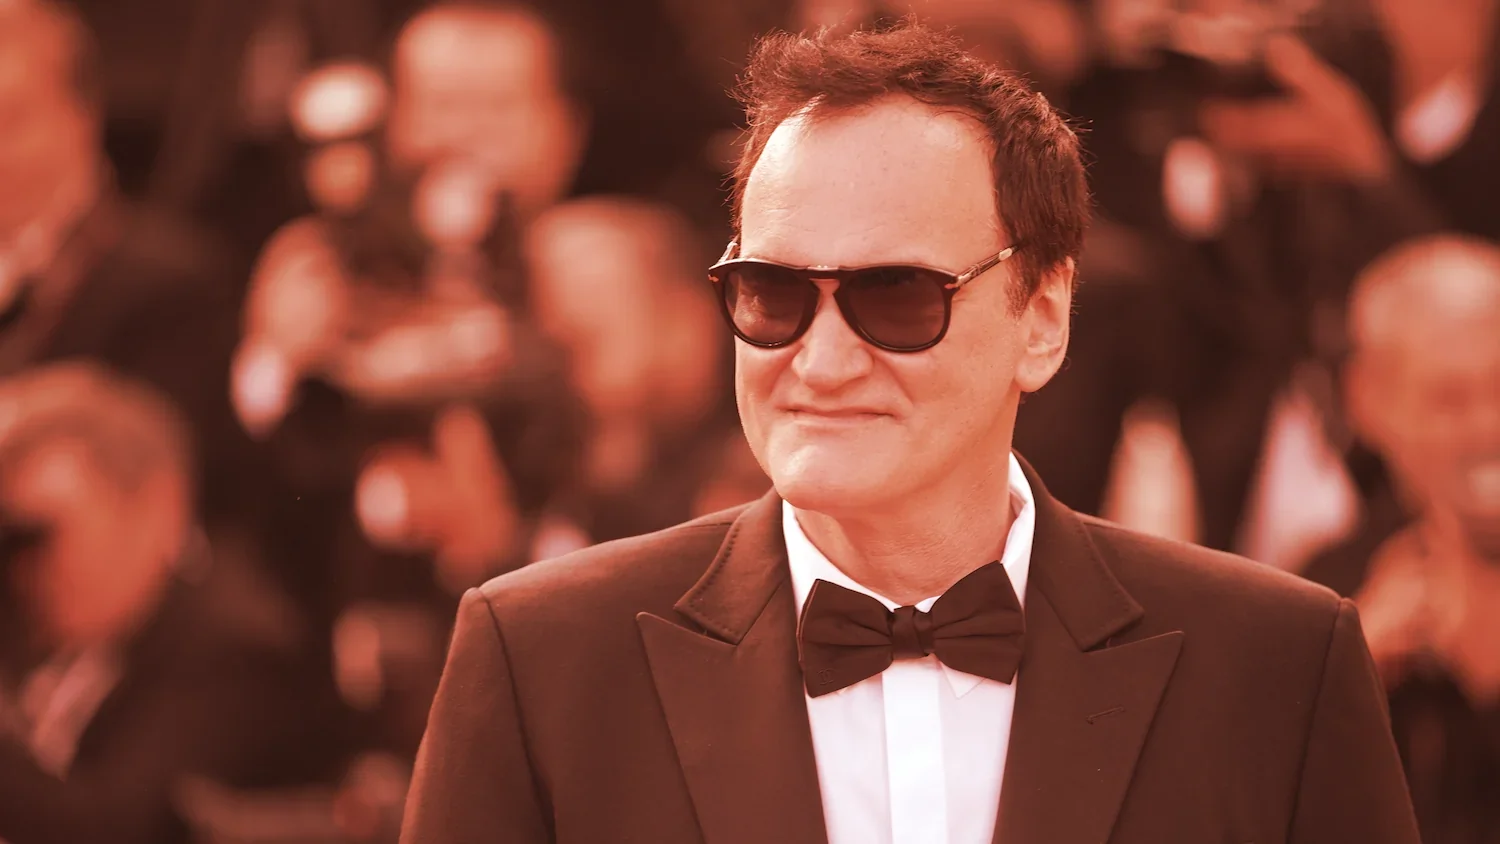 Quentin Tarantino is the director behind “Pulp Fiction” and many other critically acclaimed films. Image: Shutterstock